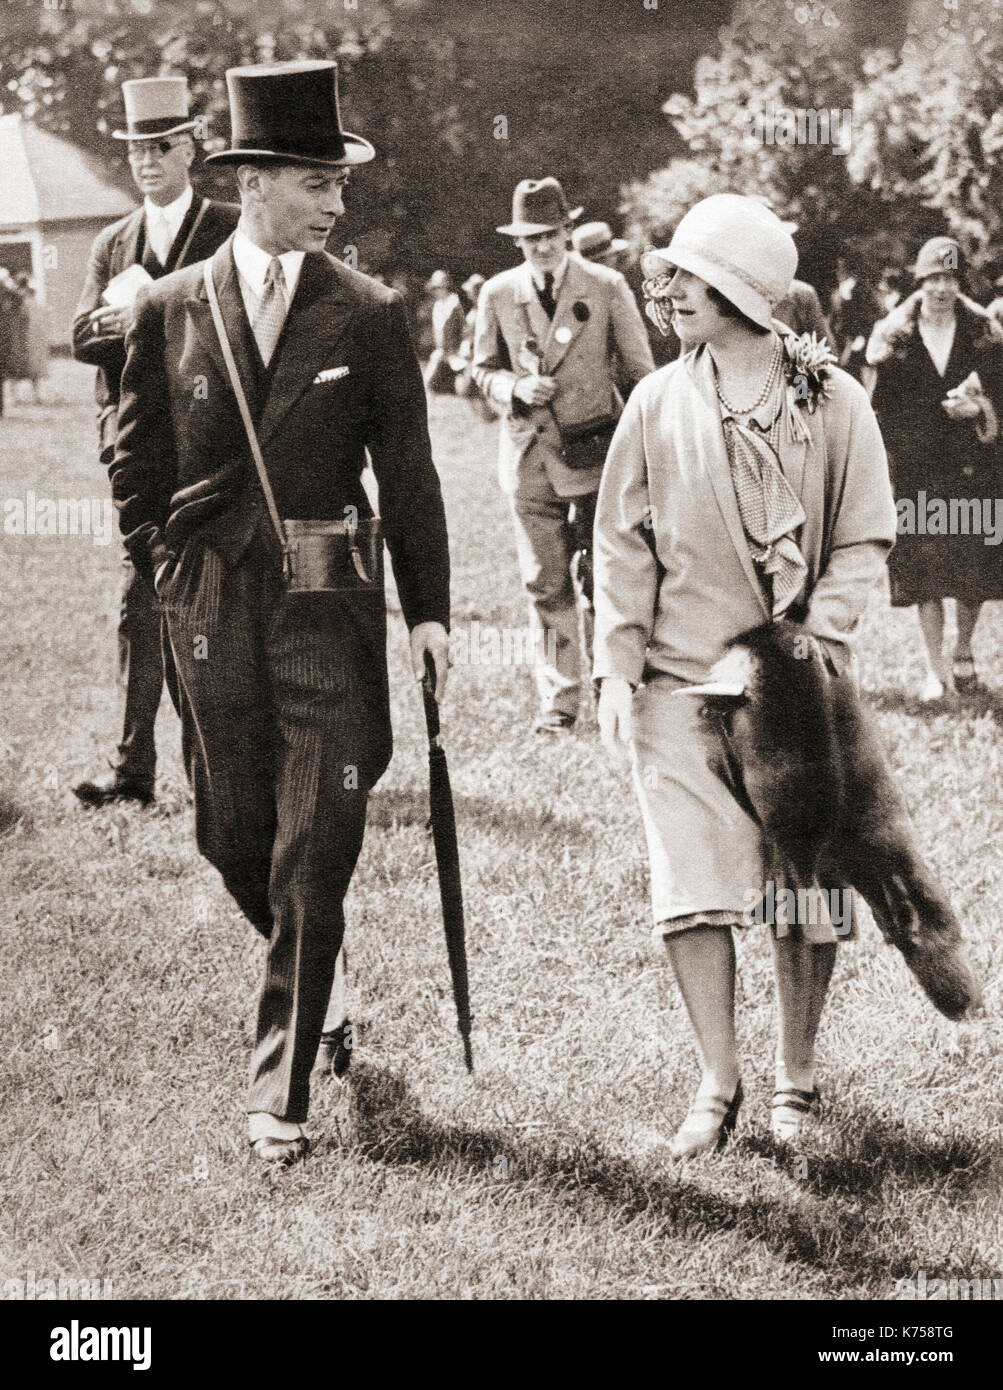 The Duke and Duchess of York at Epsom Racecourse, England in 1928.  Prince Albert, Duke of York, future George VI, 1895 – 1952.  King of the United Kingdom and the Dominions of the British Commonwealth.  Duchess of York, future Queen Elizabeth, The Queen Mother.  Elizabeth Angela Marguerite Bowes-Lyon, 1900 – 2002.  Wife of King George VI and mother of Queen Elizabeth II.  From The Coronation Book of King George VI and Queen Elizabeth, published 1937. Stock Photo